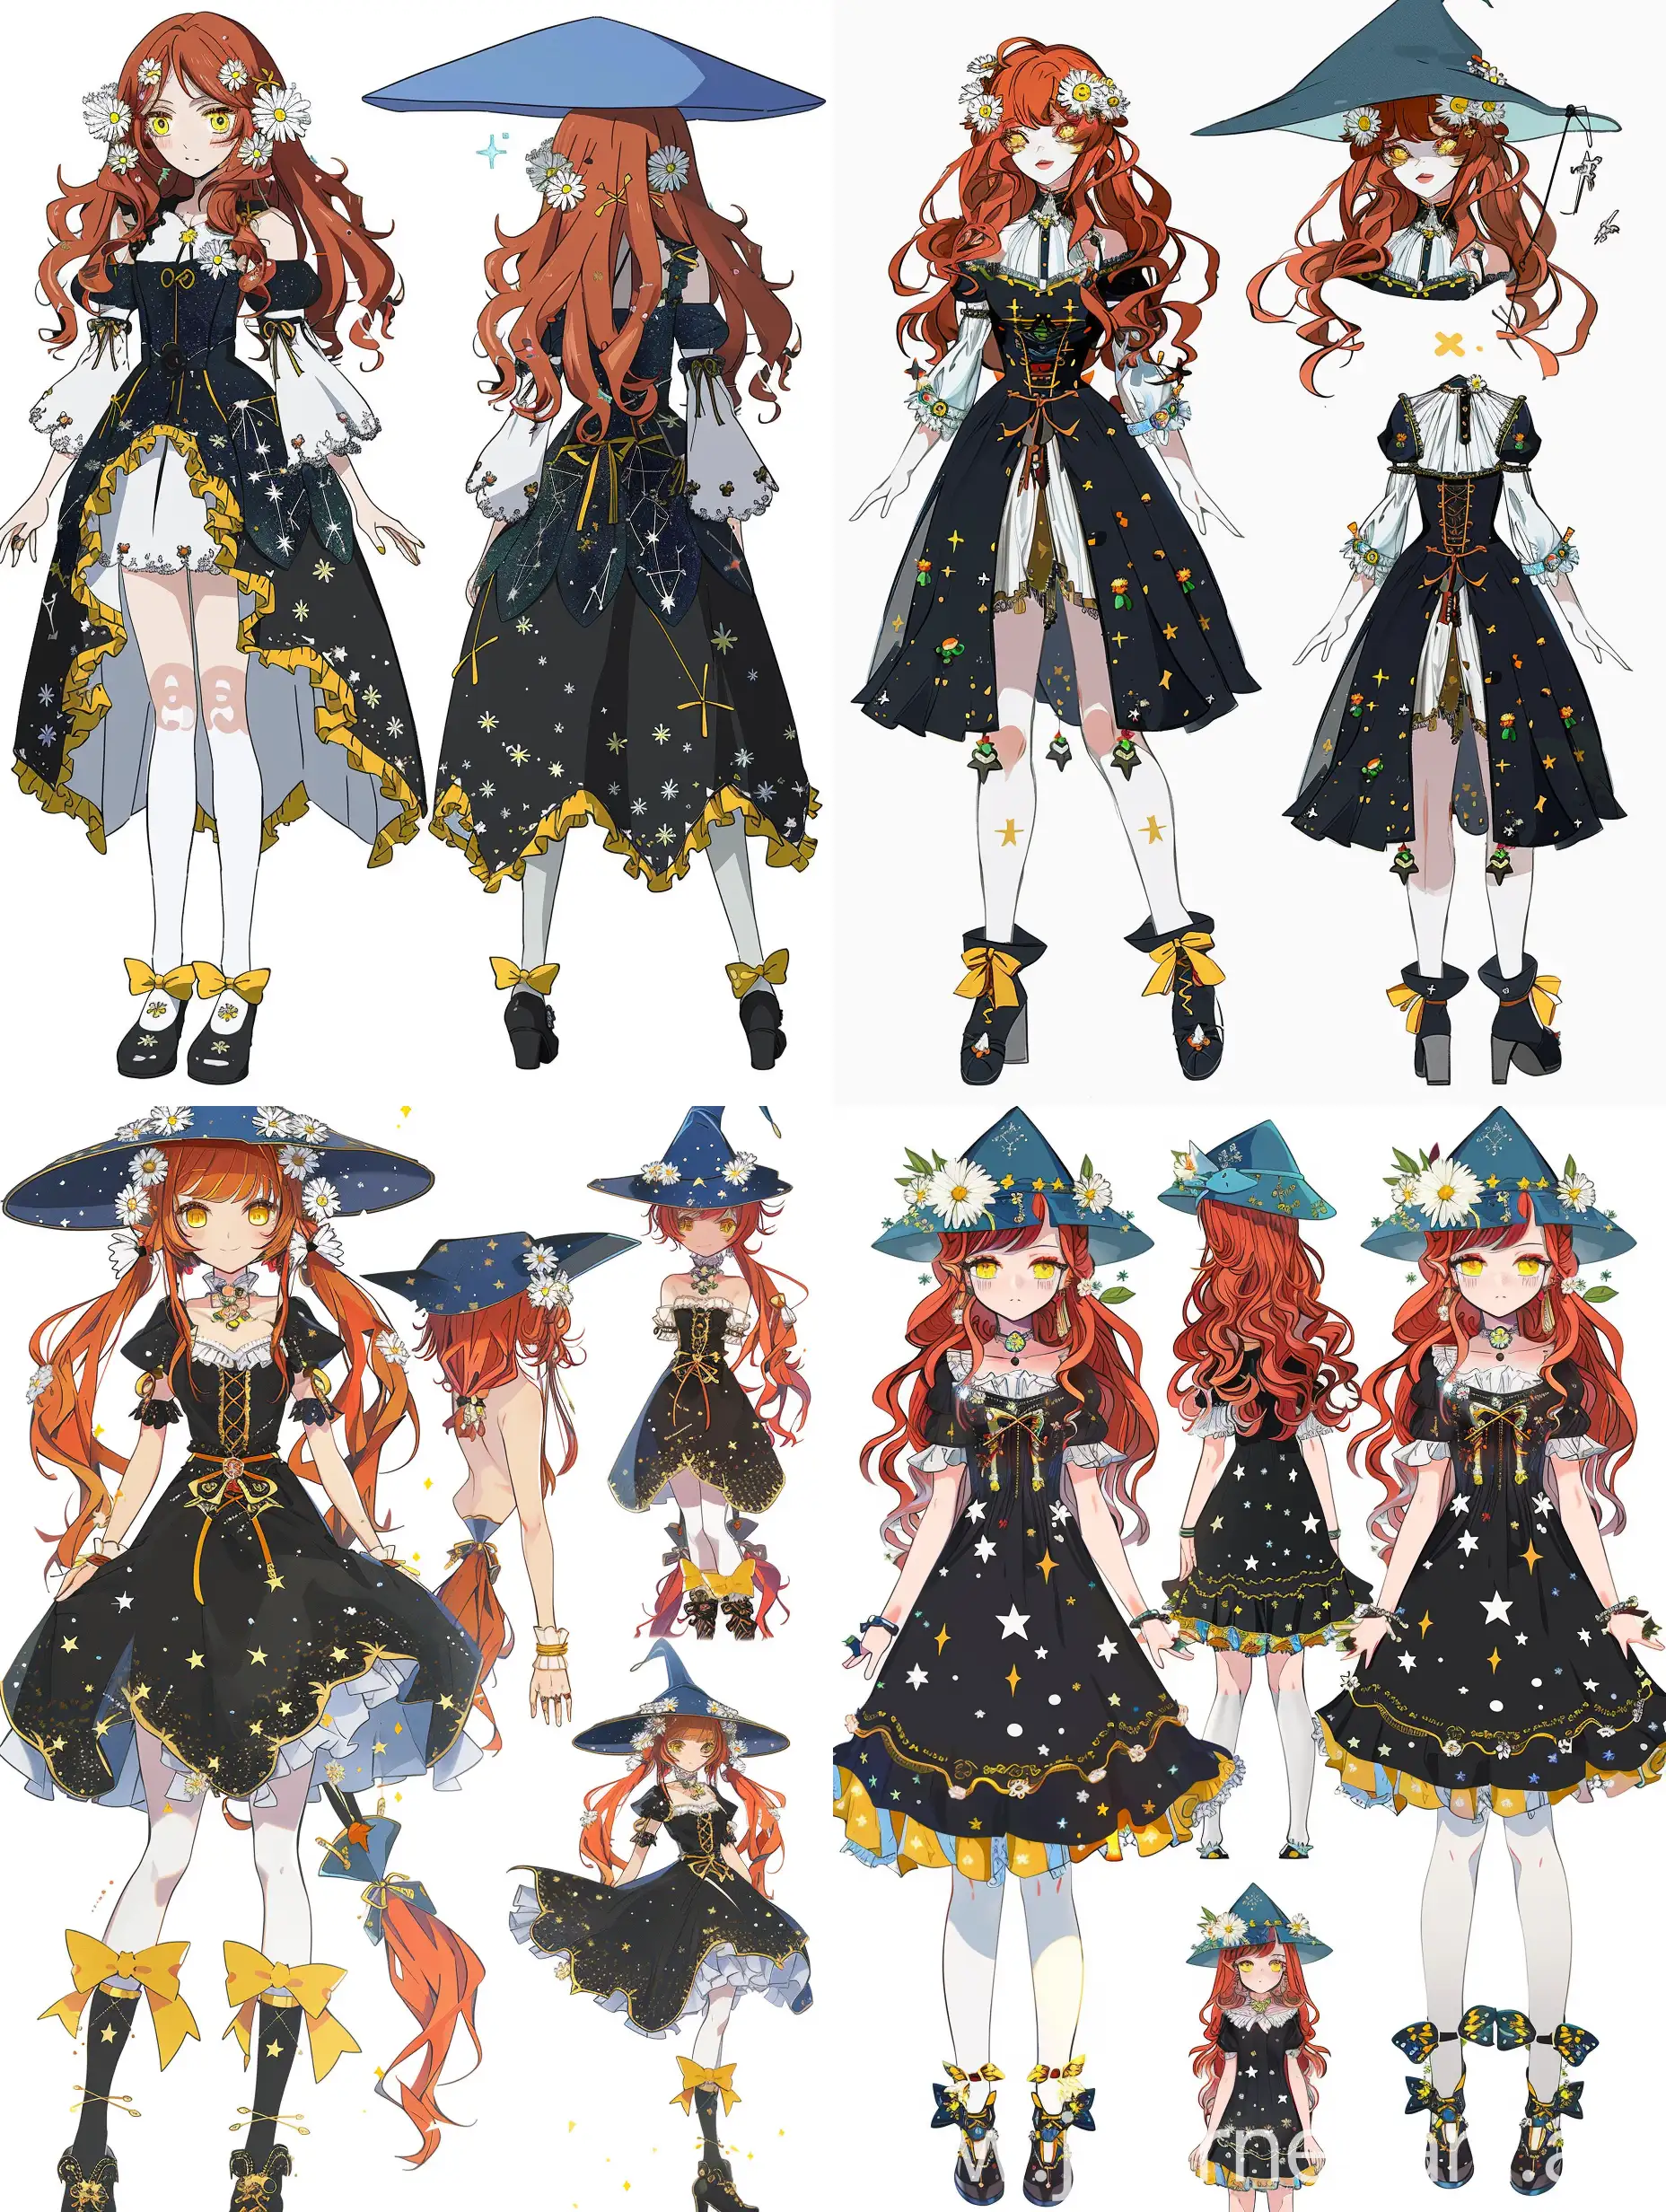 Enchanting-Anime-Girl-with-Wavy-Red-Hair-and-Fantasy-Attire